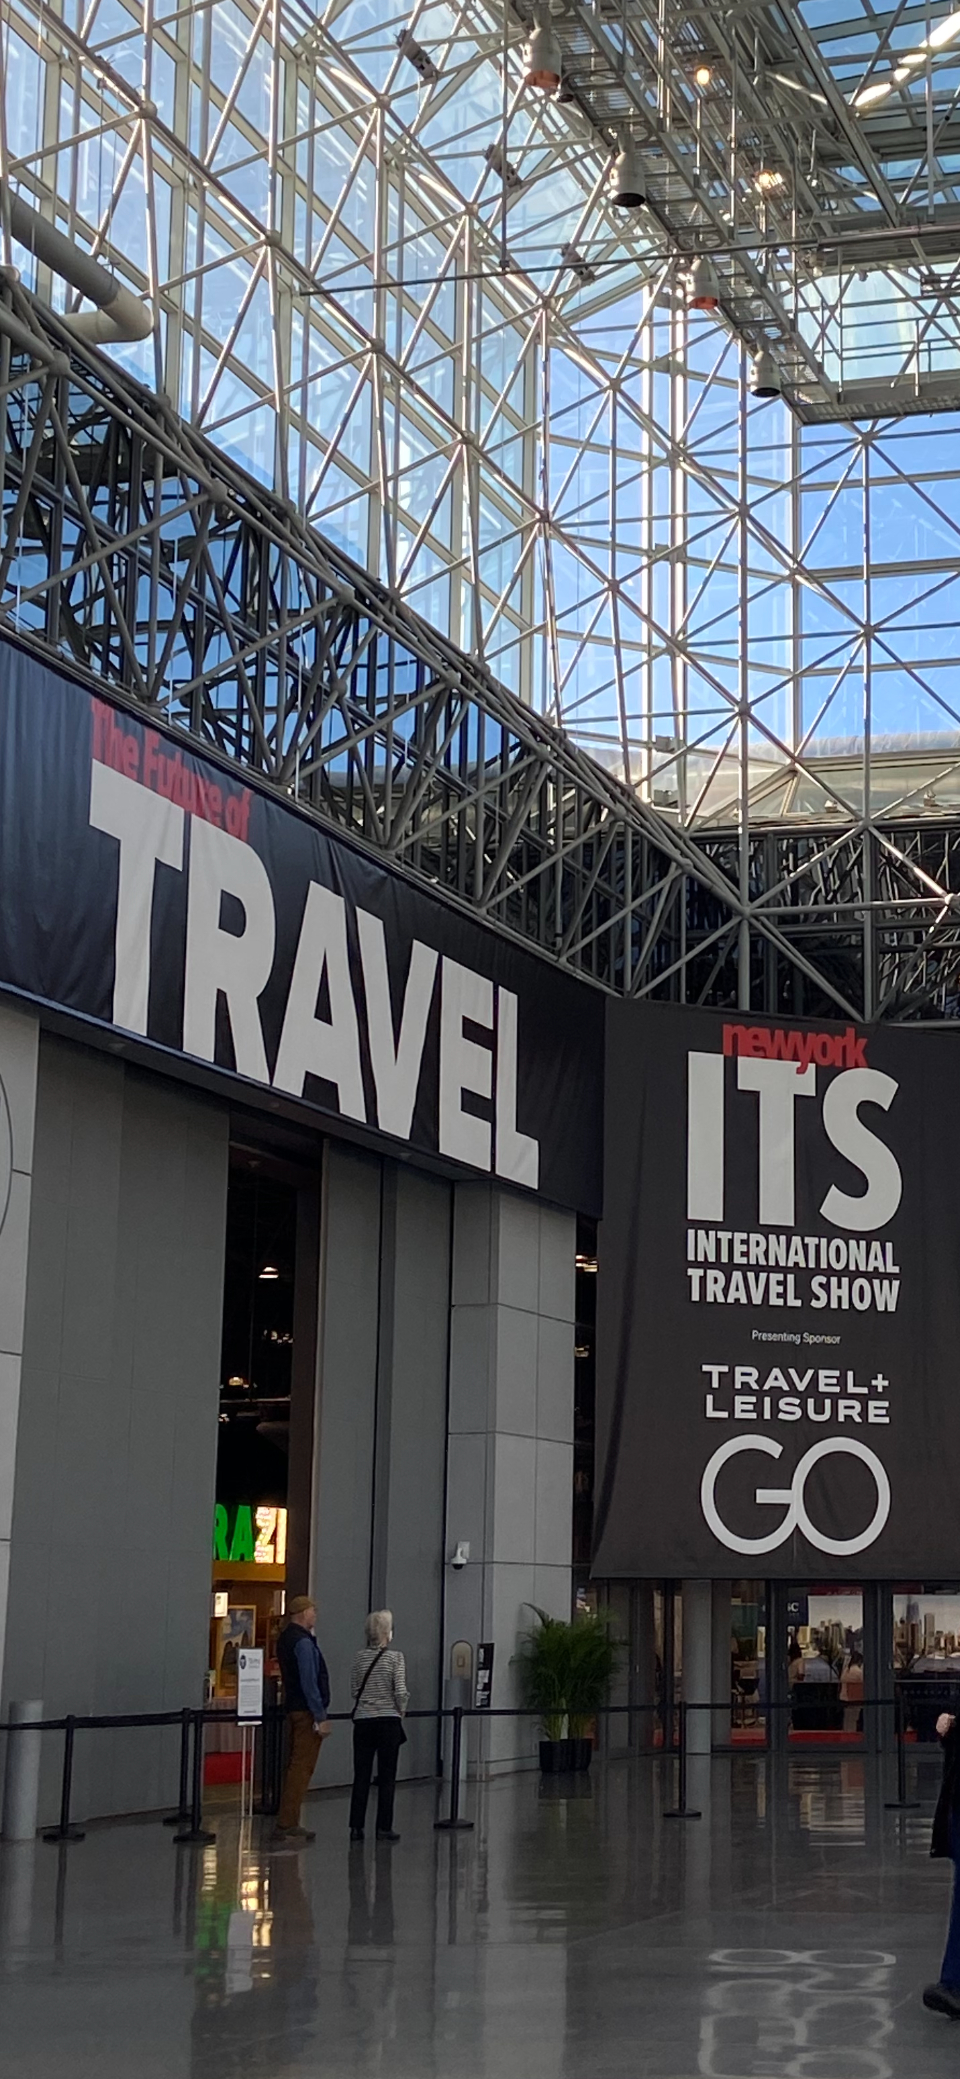 Travel + Leisure GO Launches 2022 New York International Travel Show as